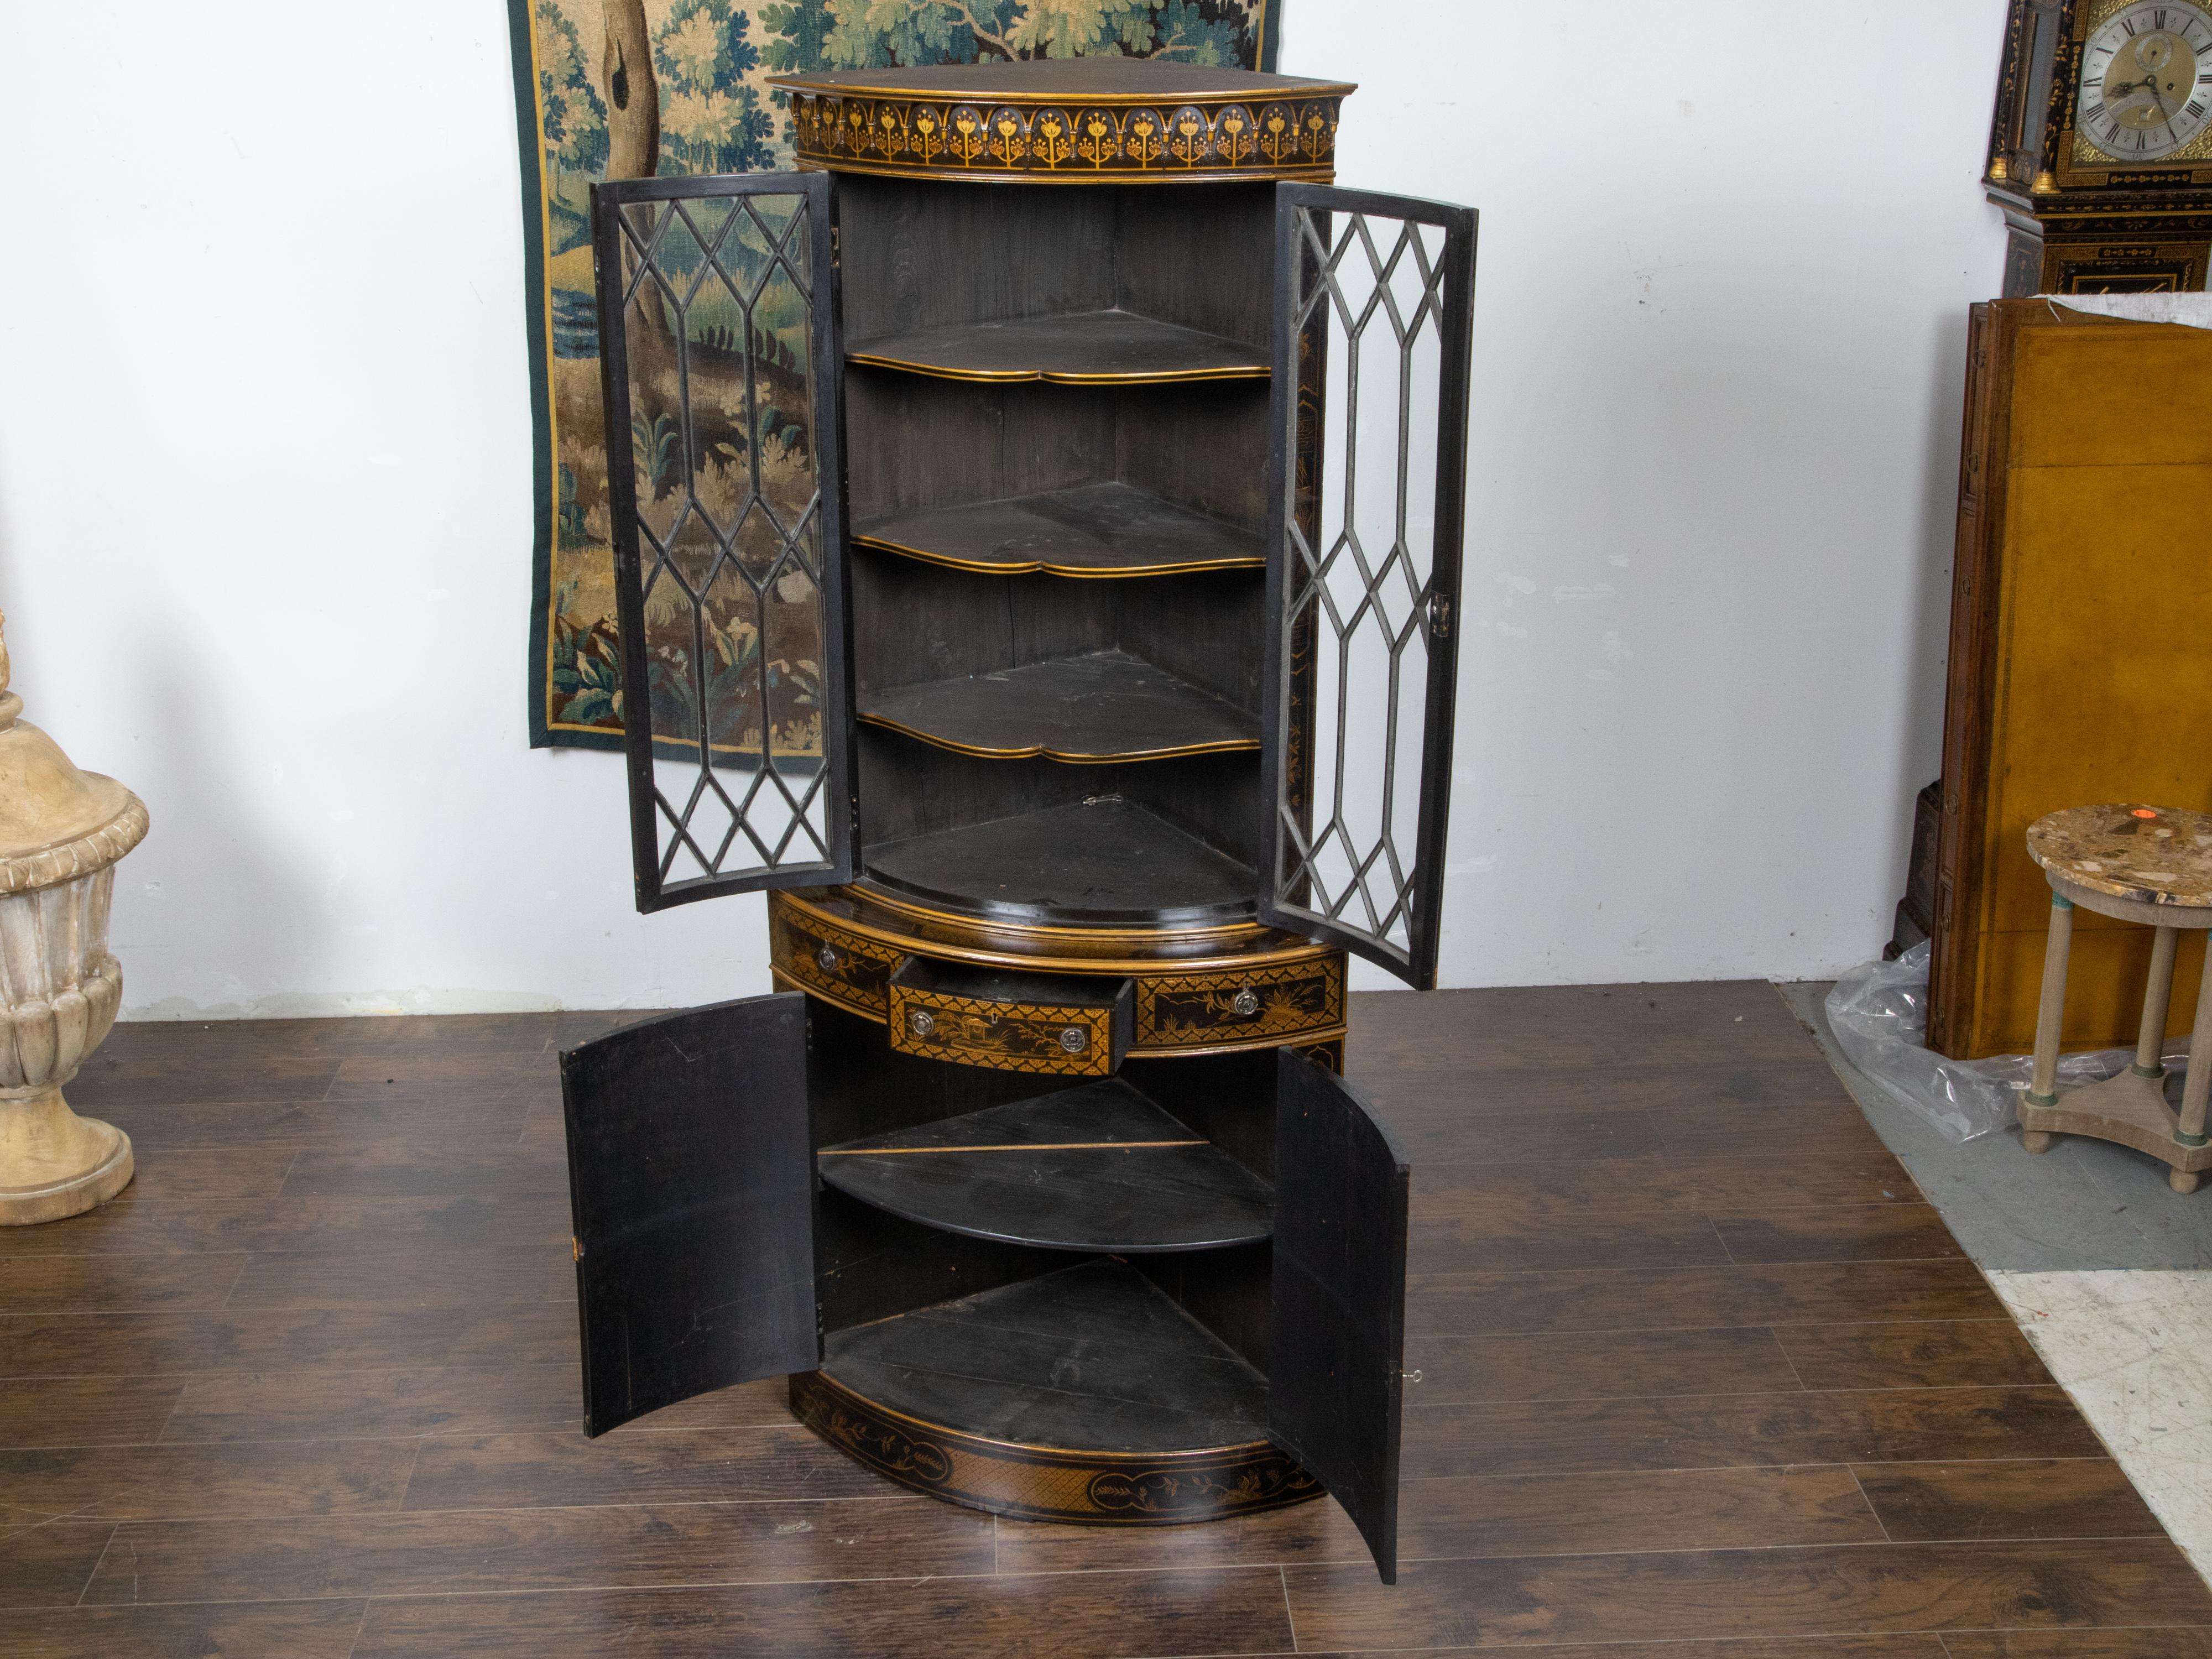 An English black and gold corner cabinet from the 19th century, with paneled glass doors, three middle drawers and Chinoiserie décor. Created in England during the 19th century, this corner cabinet attracts the attention with its complimenting